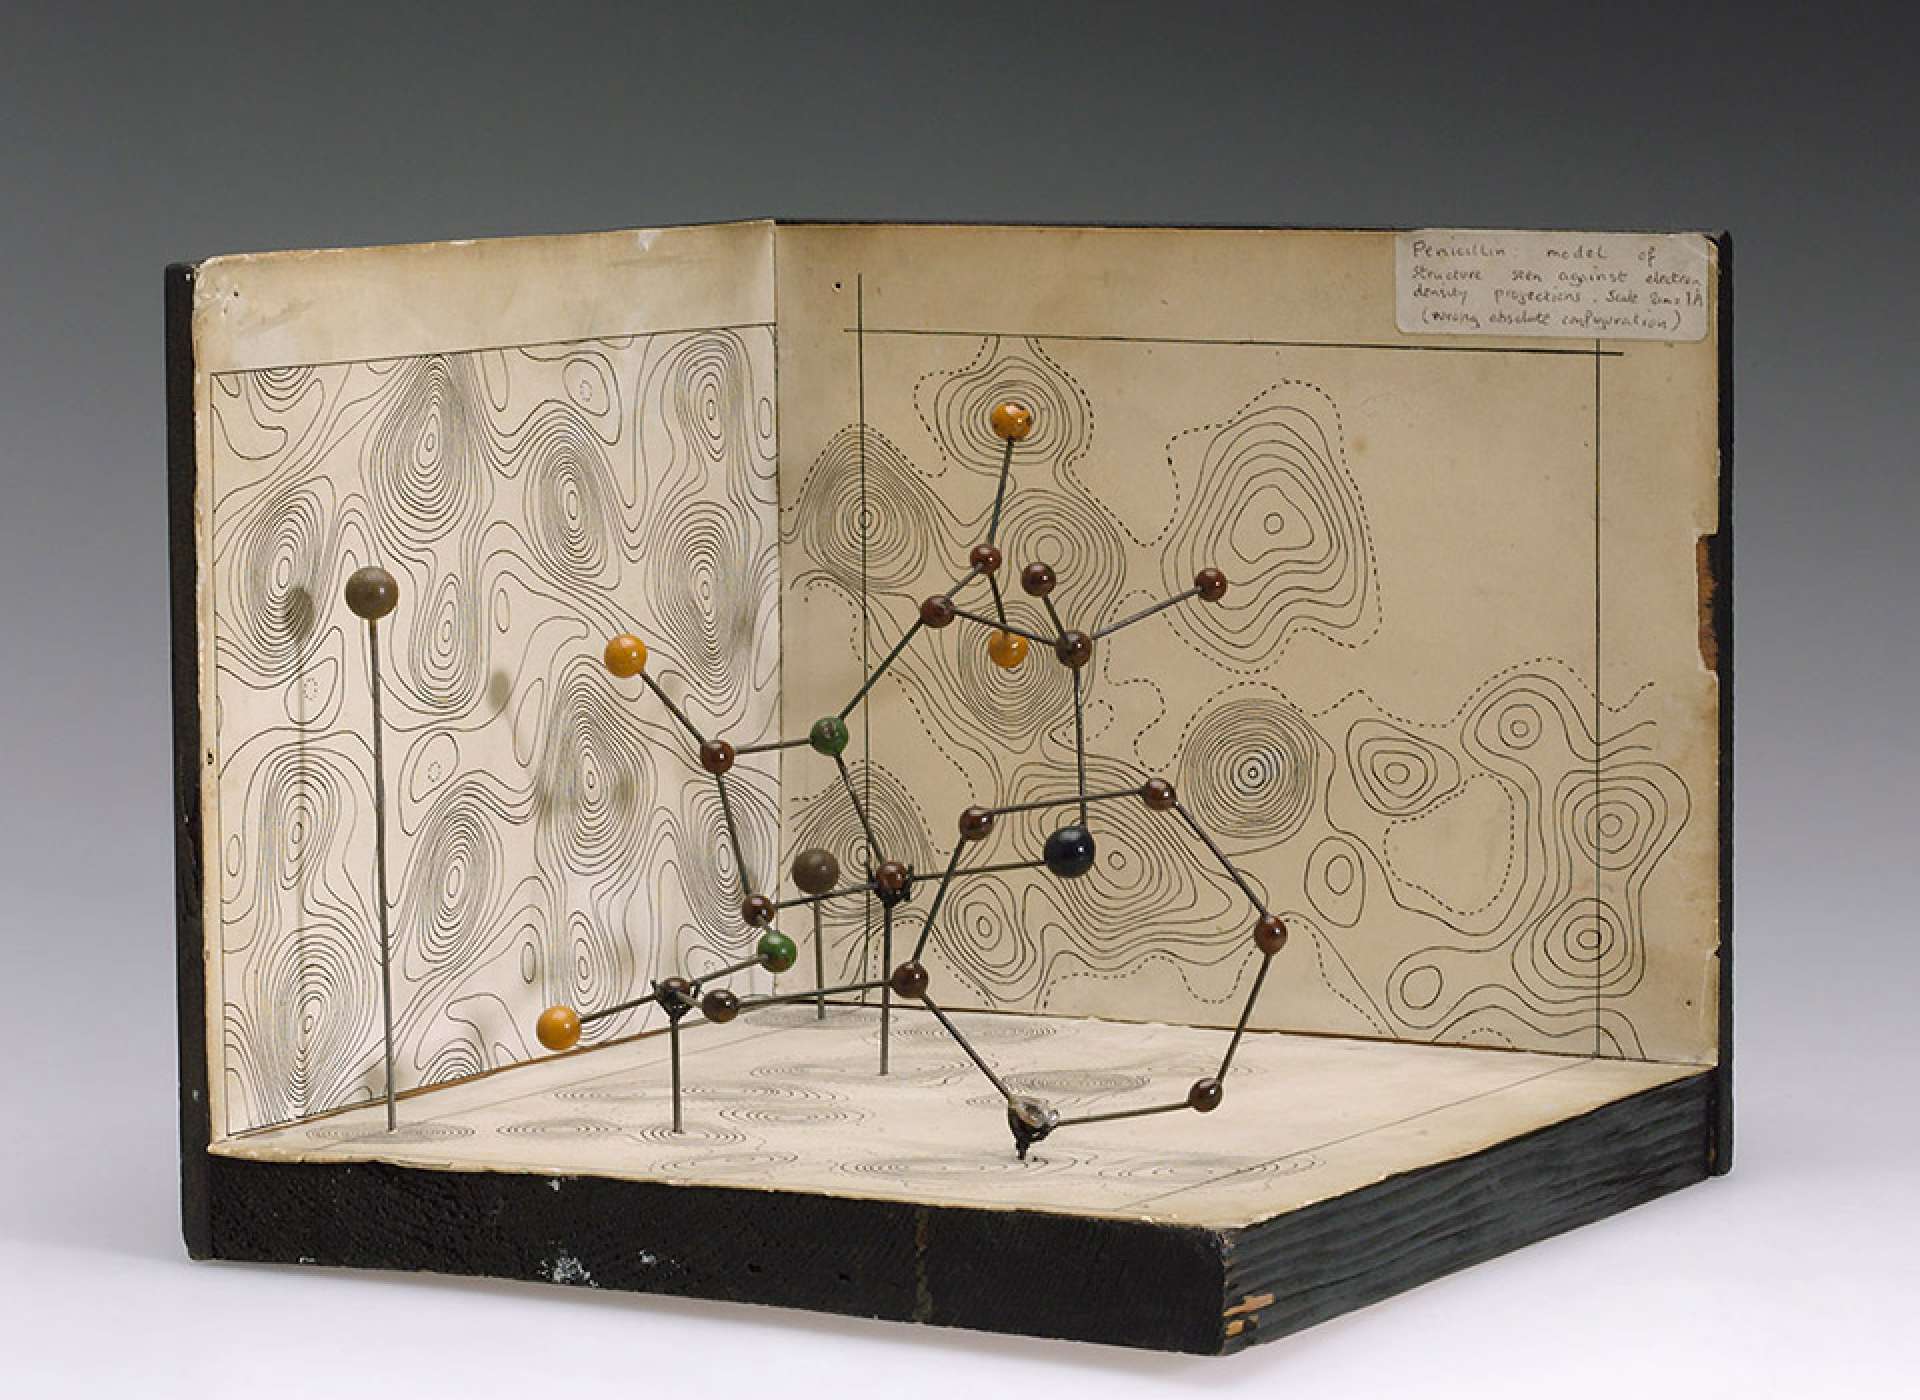 A physical model of the penicillin molecule, constructed based on the x-ray crystallography of Dorothy Crowfoot Hodgkin. From the Science Museum of London.